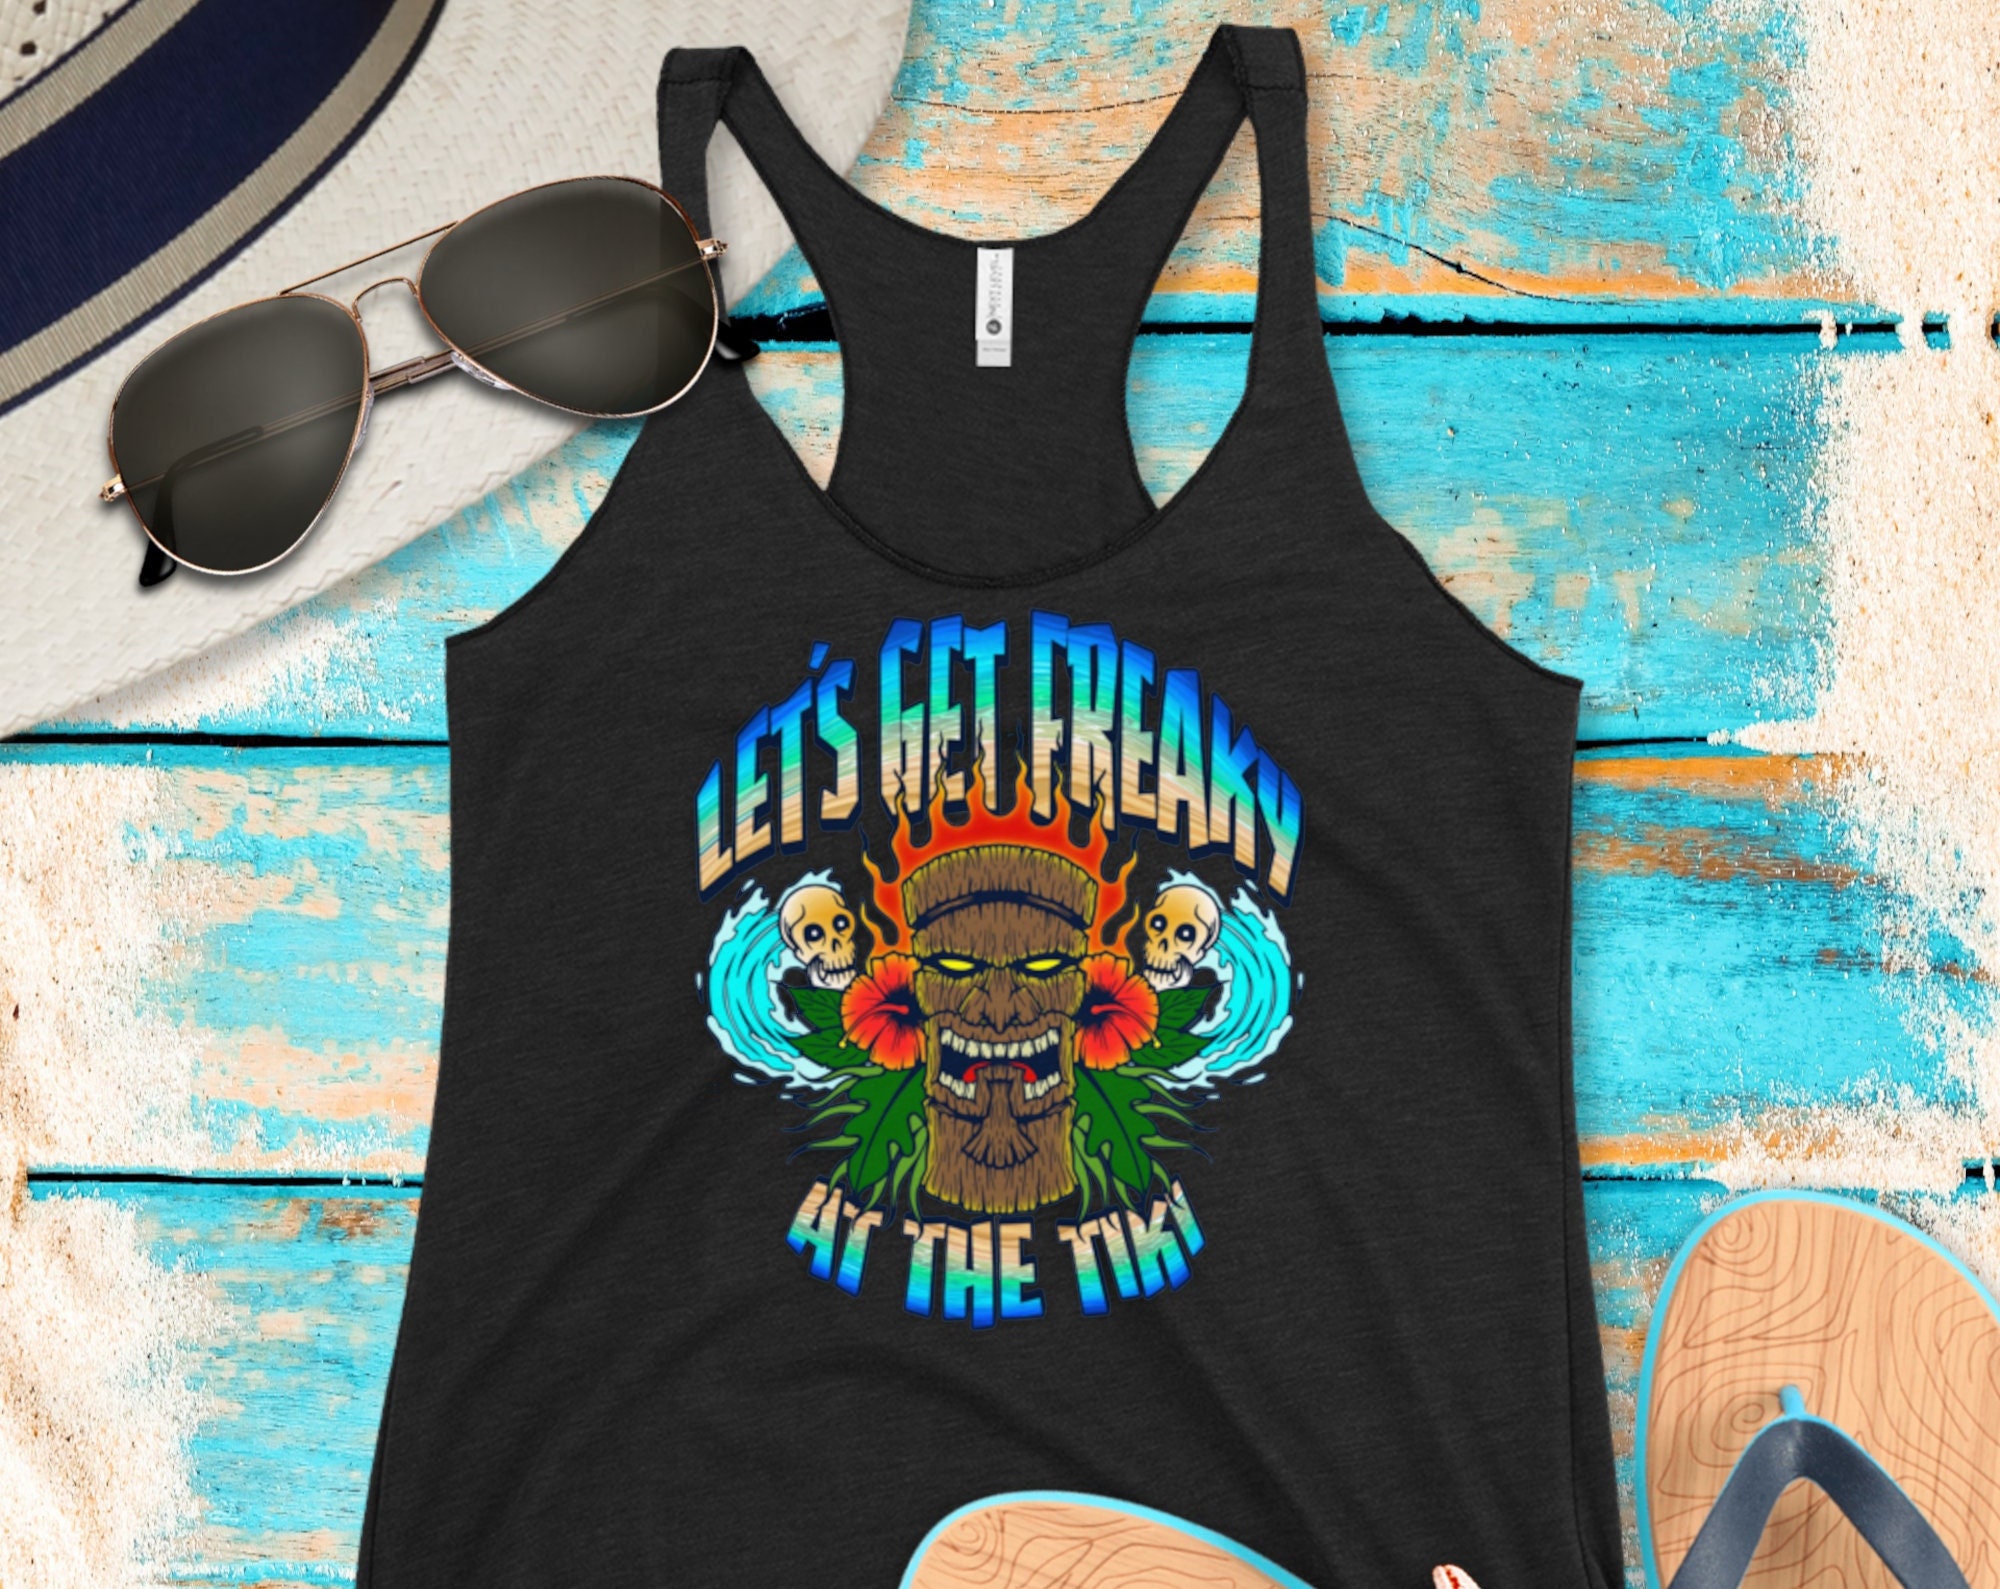 Discover Let's Get Freaky At The Tiki Women's Racerback Tank Top